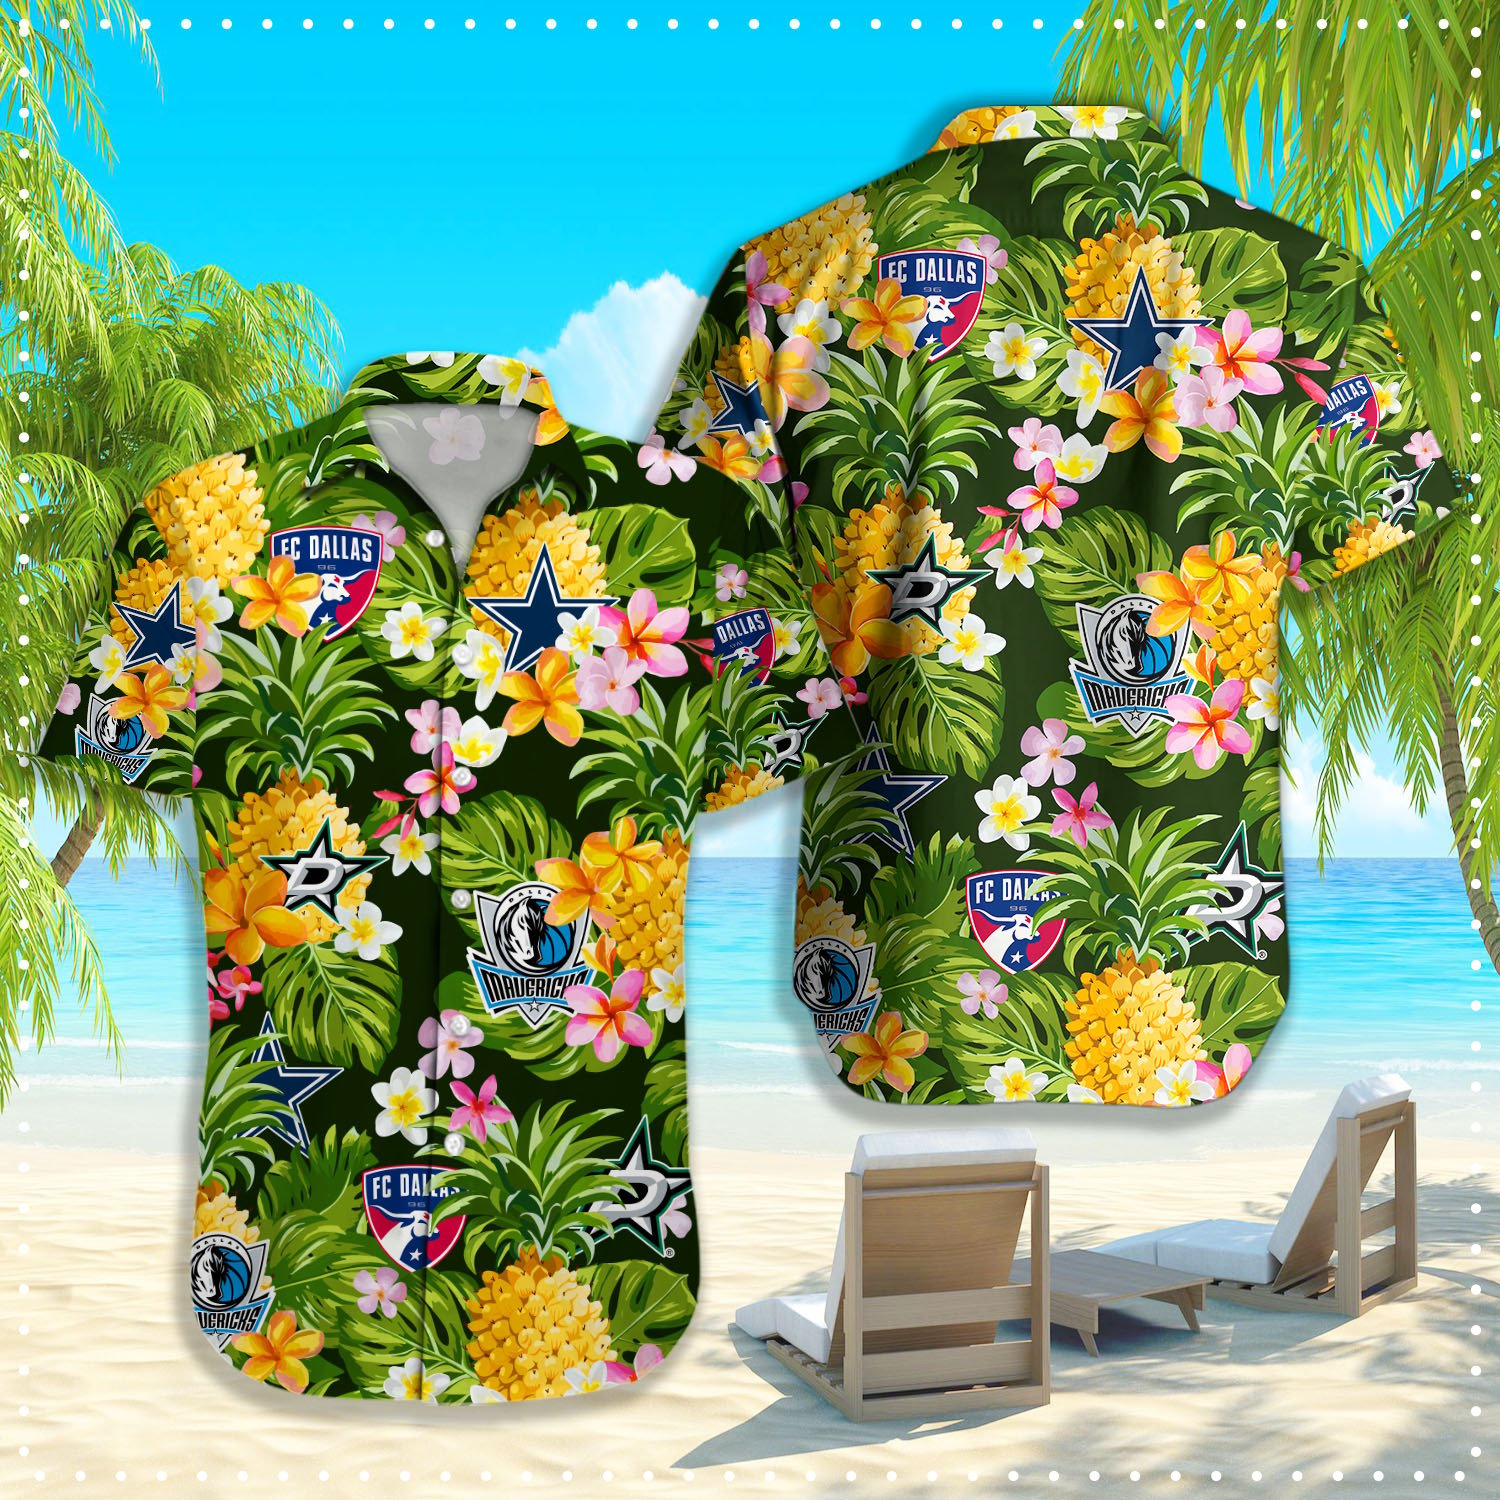 If you're looking for a NHL Hawaiian shirt to wear, don't wait until the last minute! 201